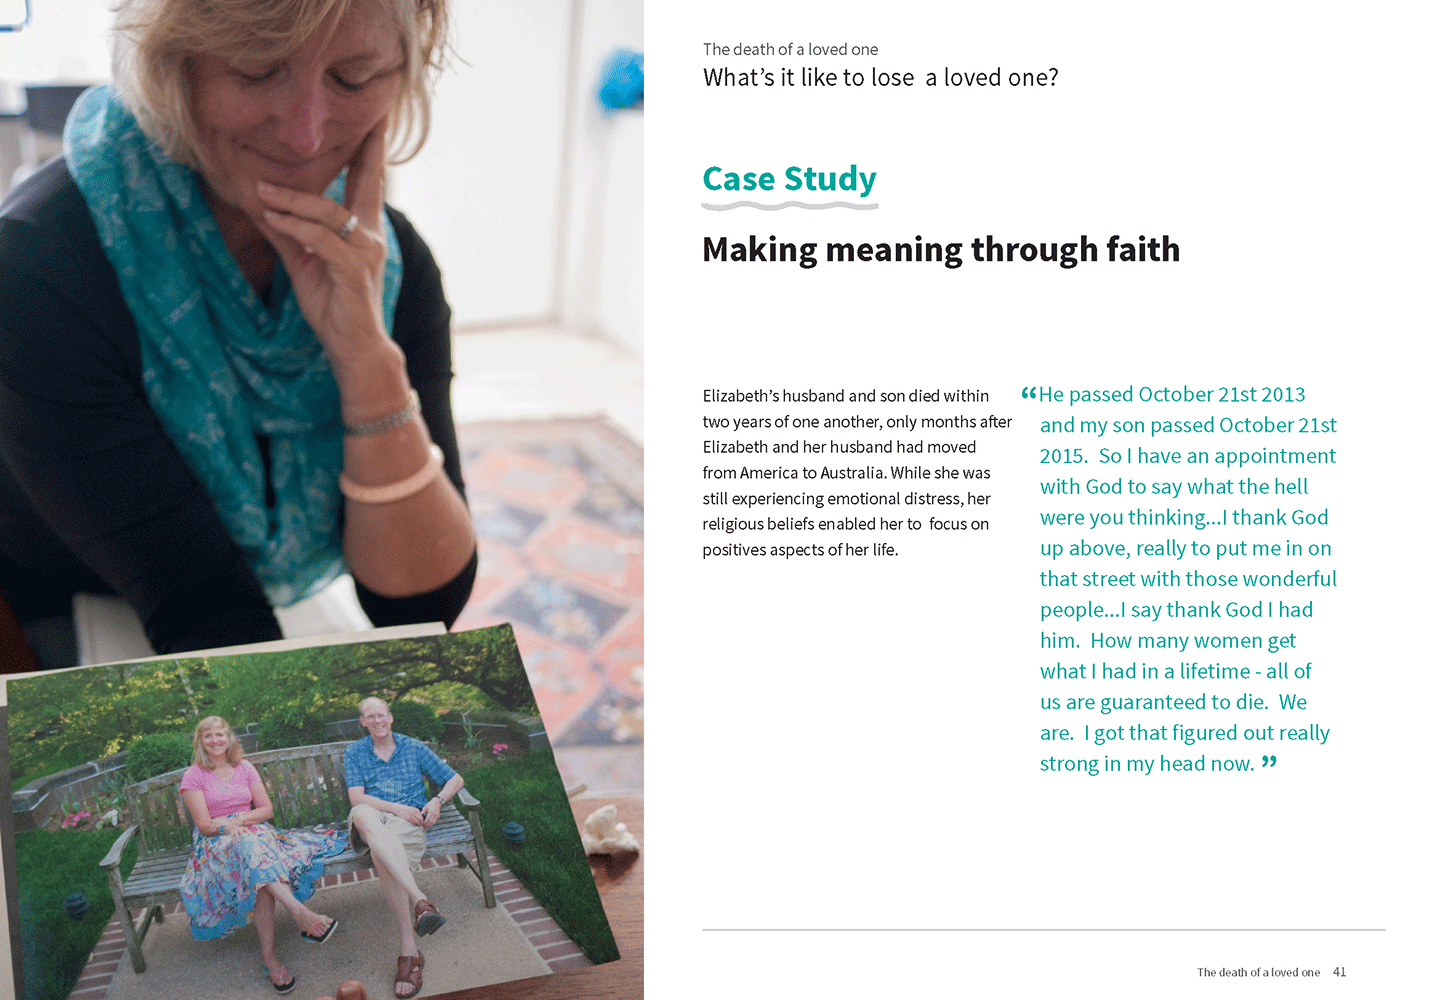 A one page excerpt from our research report into the death of a loved one. This page discusses a case study about how faith affects the experience. There is an image of a woman to the left, and report text to the right.